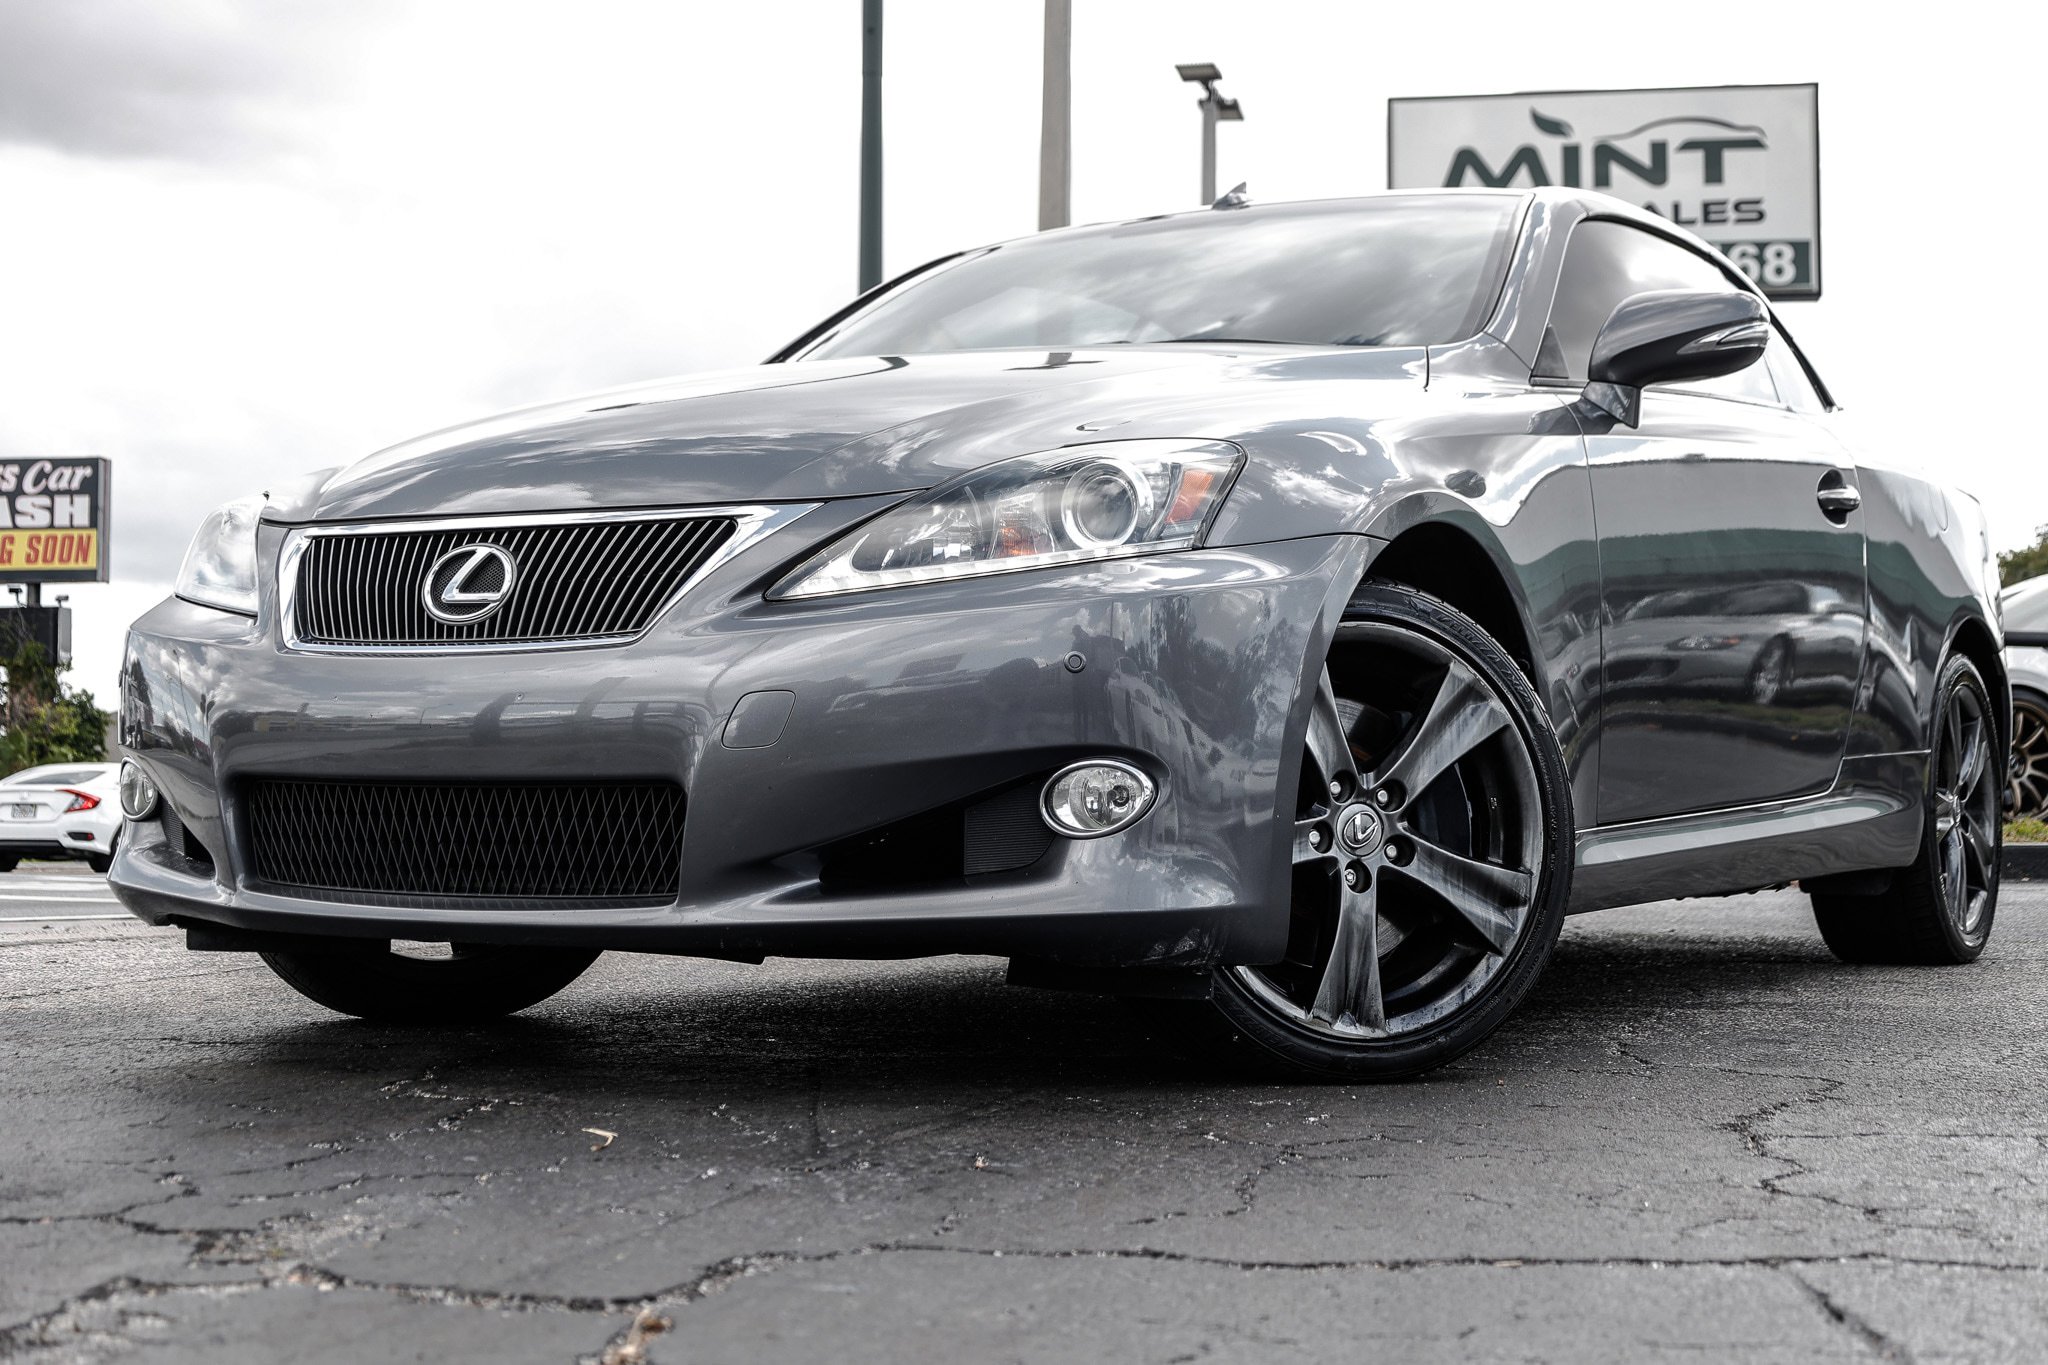 Used 2012 Lexus IS 350C Convertibles for Sale Near Me in Orlando, FL -  Autotrader